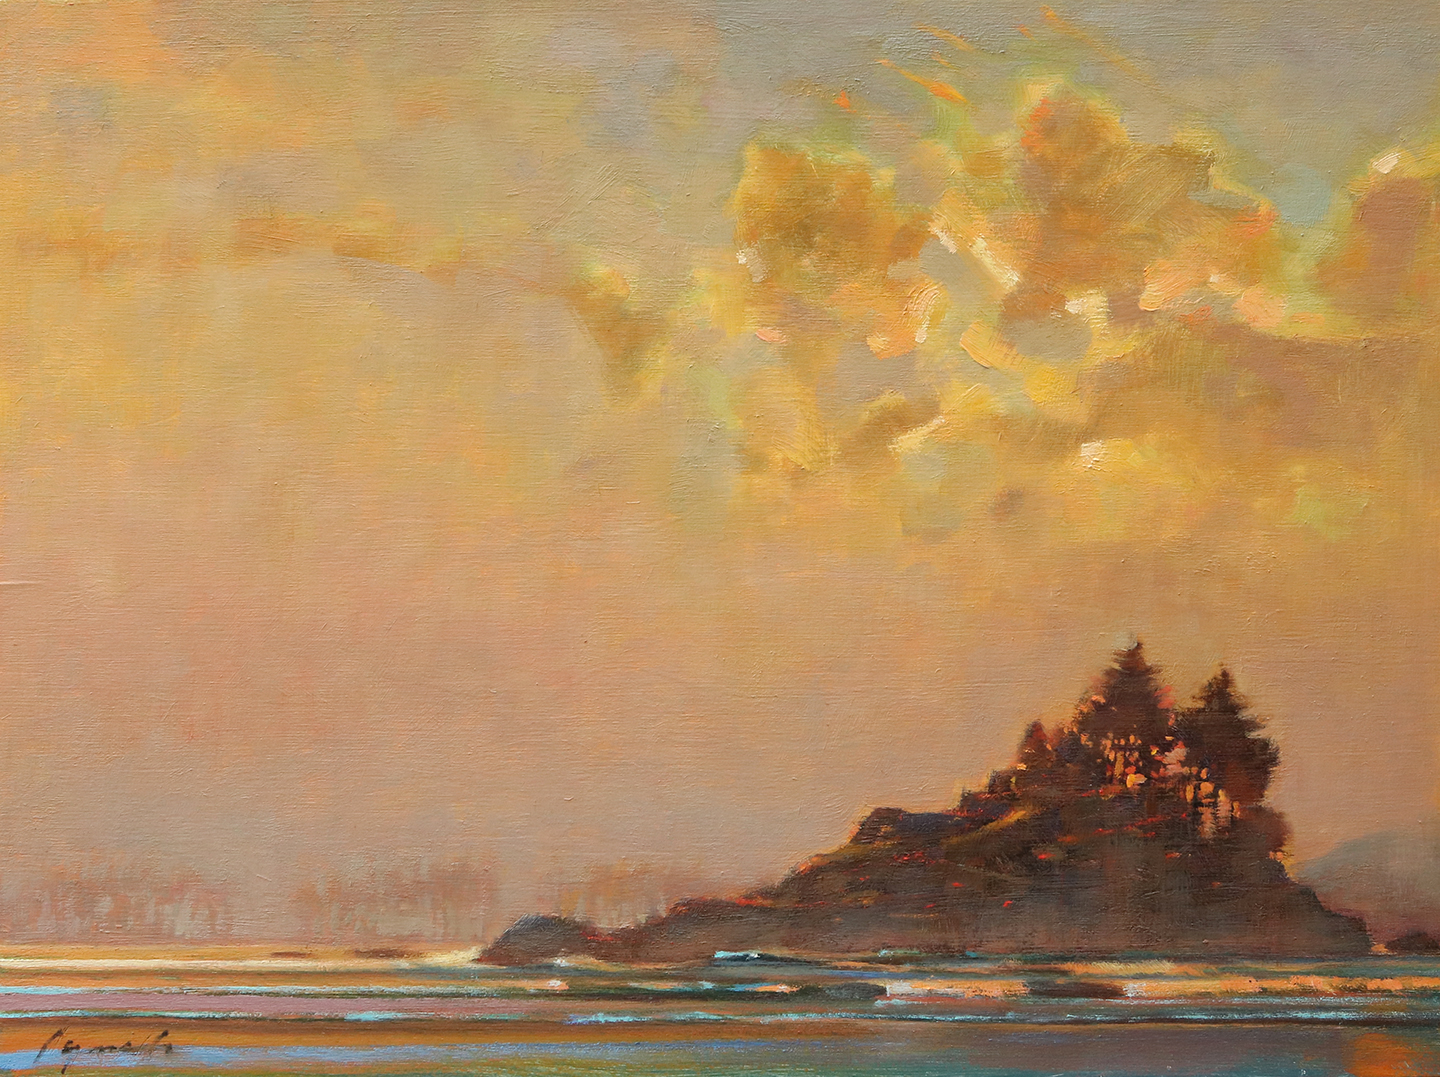 Chesternman Marine Front Evening - 18 by 24 oil on prepared board - sold by The Avenue Gallery